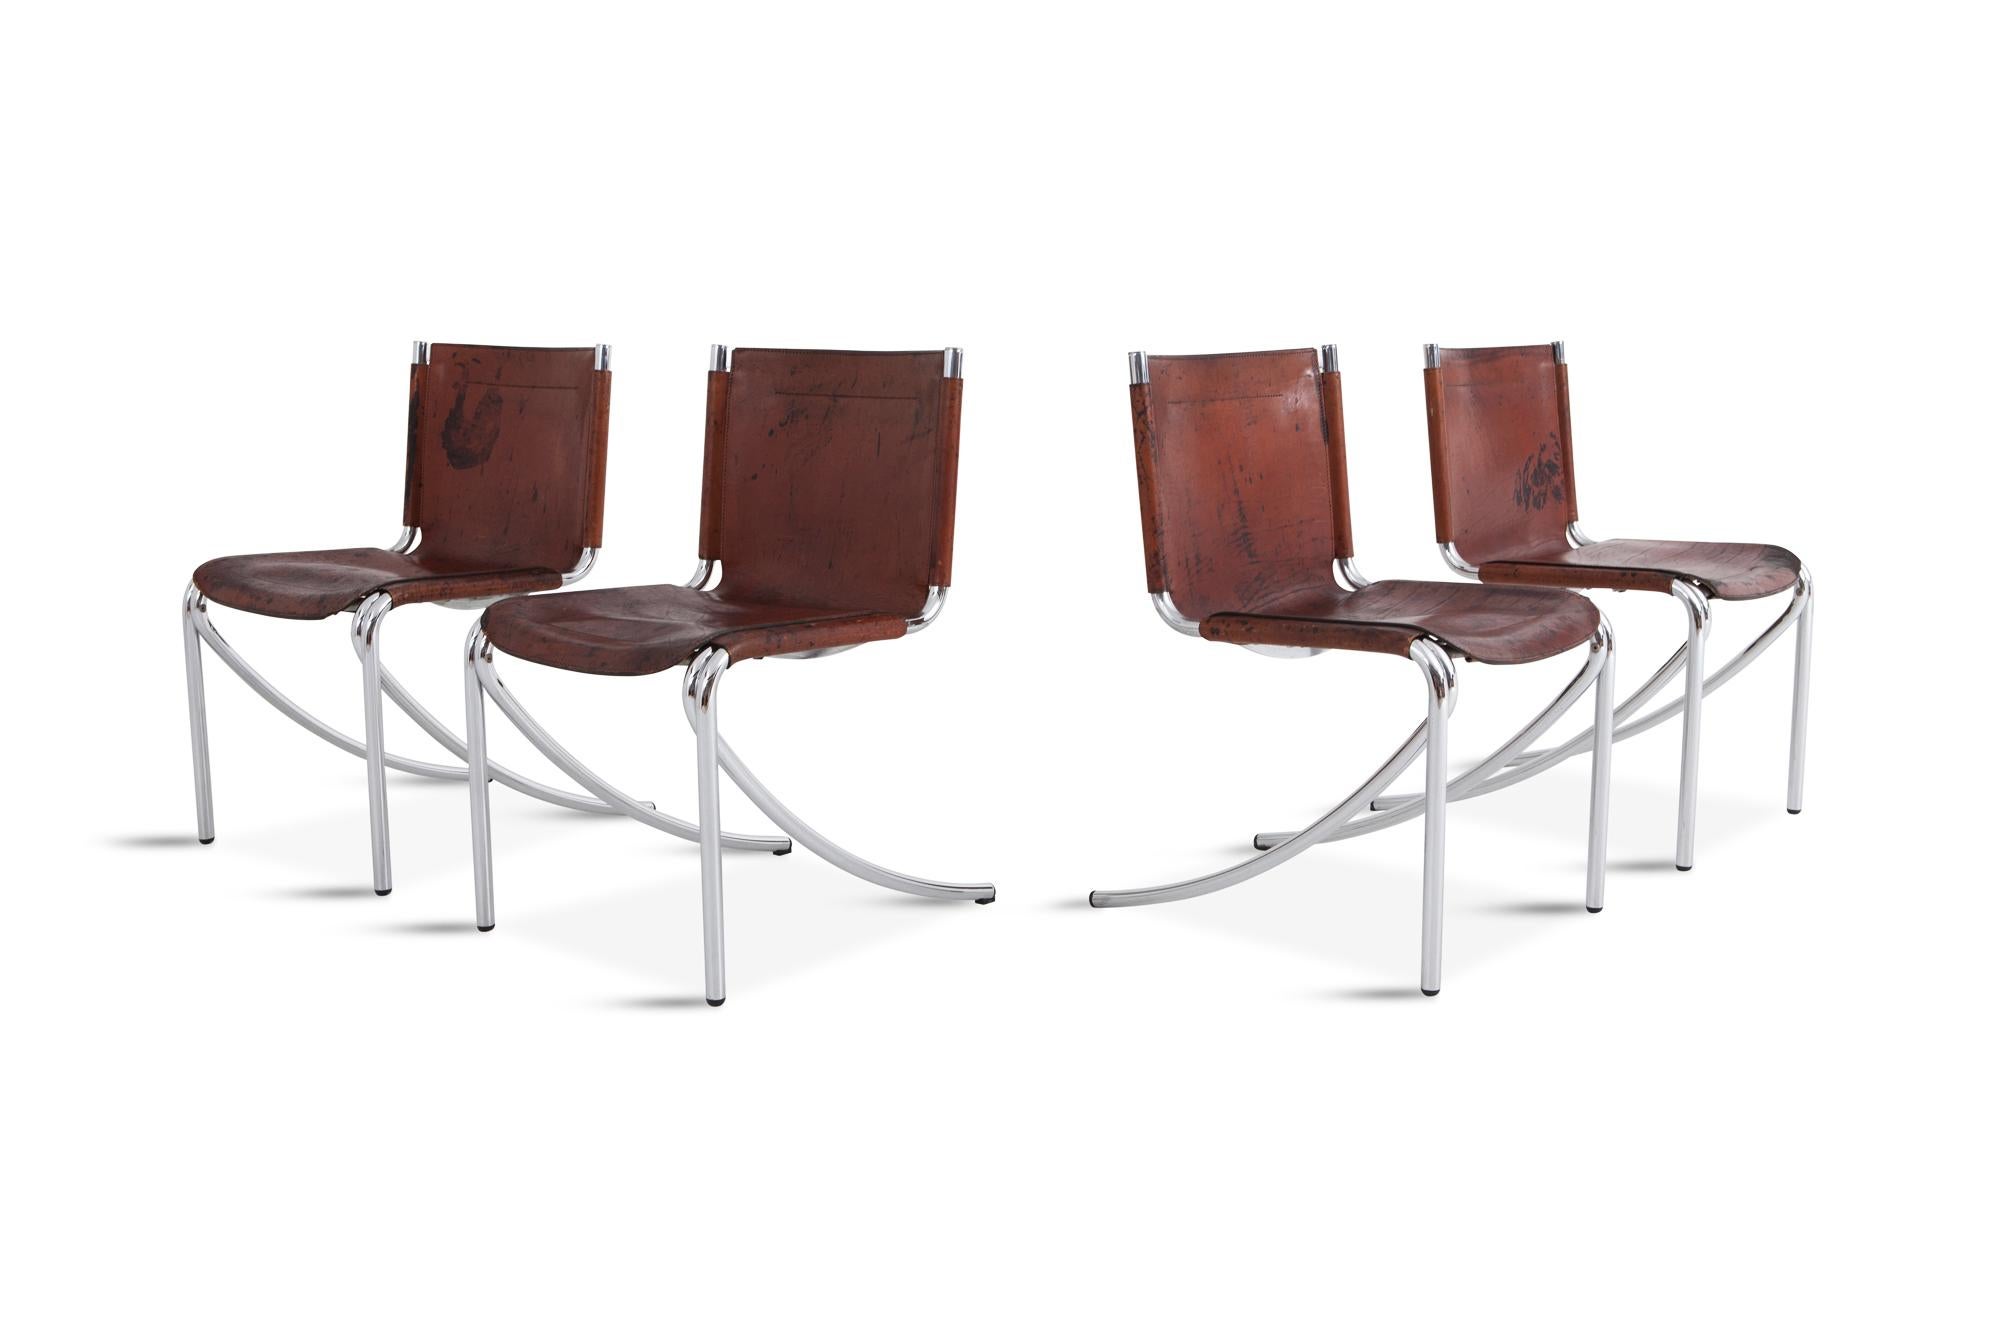 Acerbis in Italy manufactured these Jot chairs designed by Giotto Stoppino.

Stunning patina on the leather adds tons of character on these oxblood leather chairs.
The chrome frame is also still in really good condition.